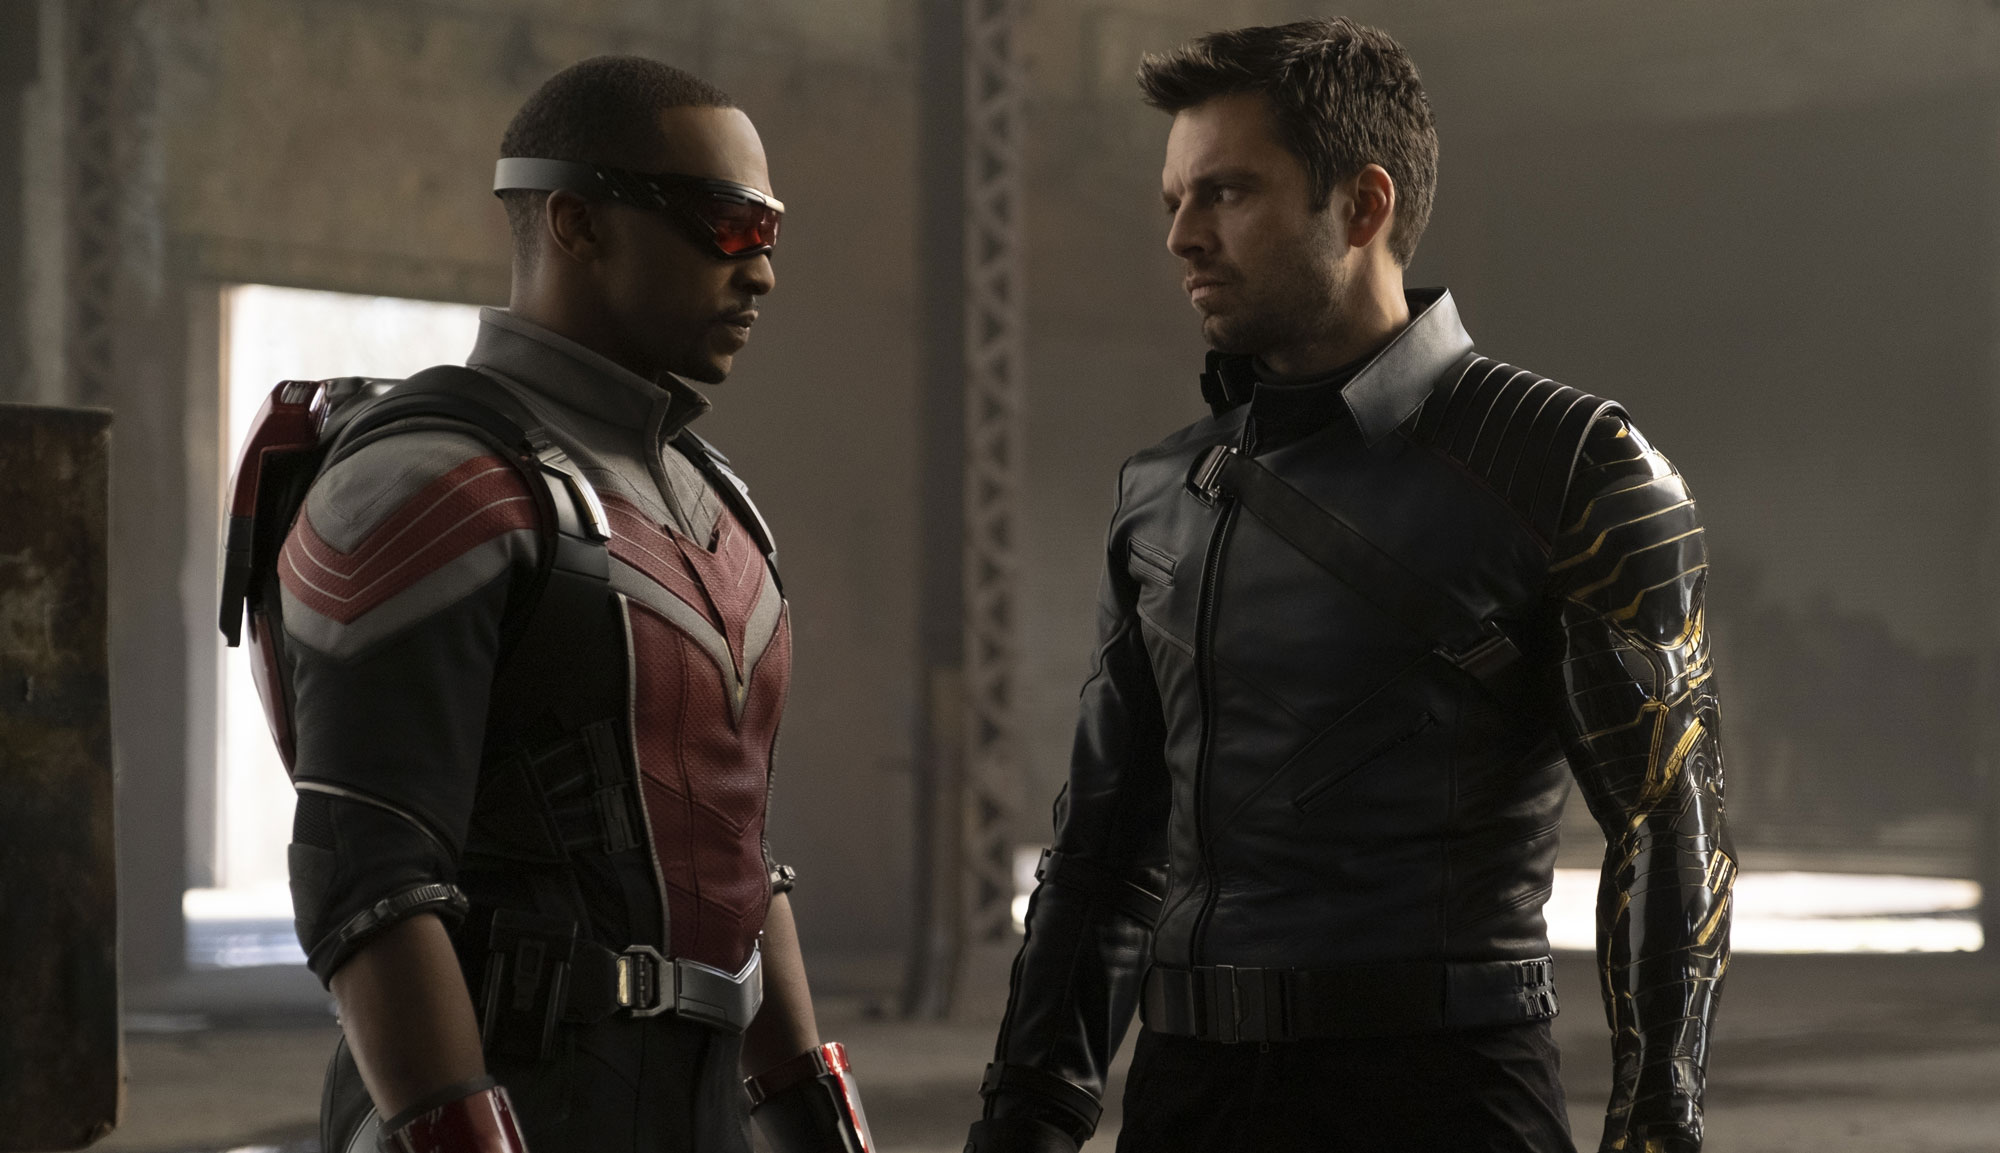 Anthony Mackie and Sebastian Stan in "The Falcon and the Winter Soldier"